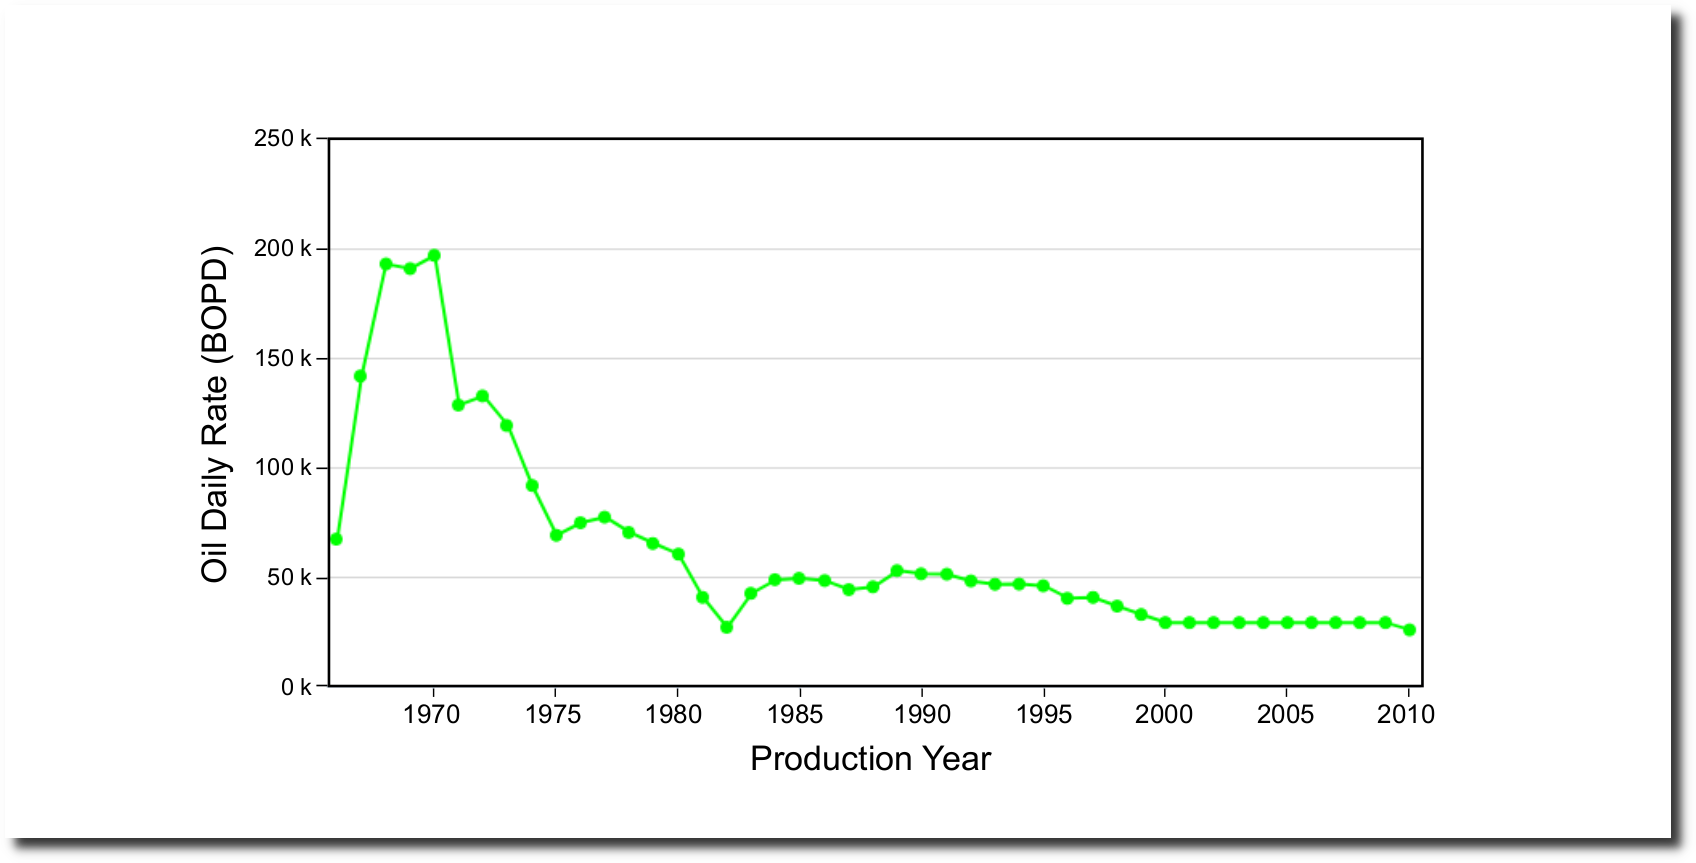 Figure 1 Shadow - Production history curve (1966-2010) of the Amal Field